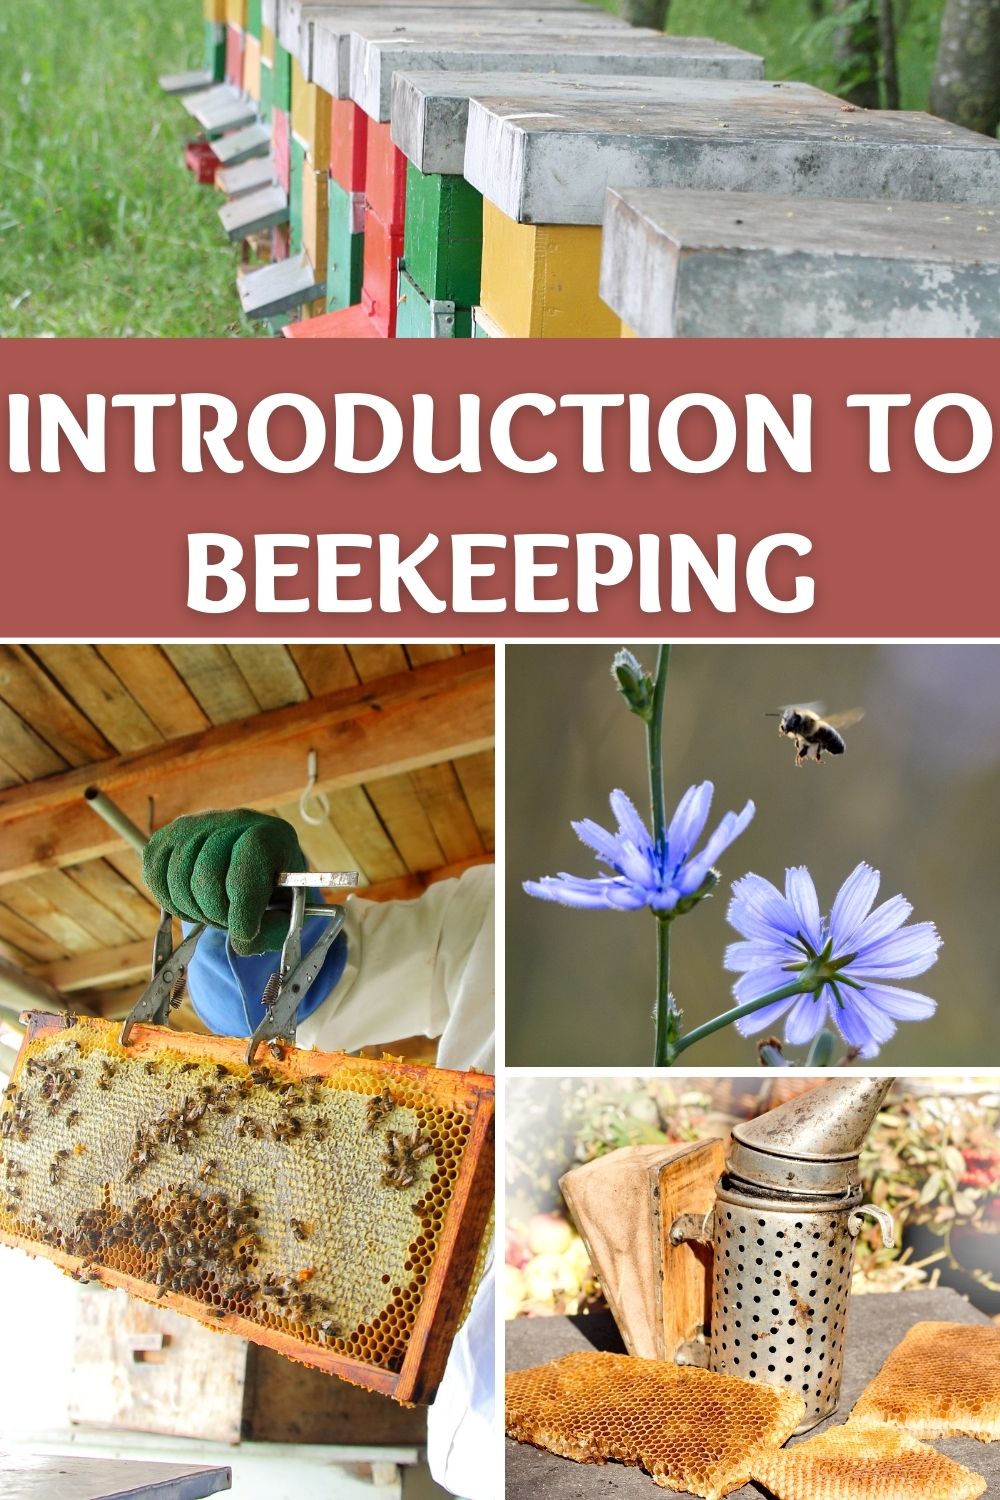 Quick Introduction to Beekeeping